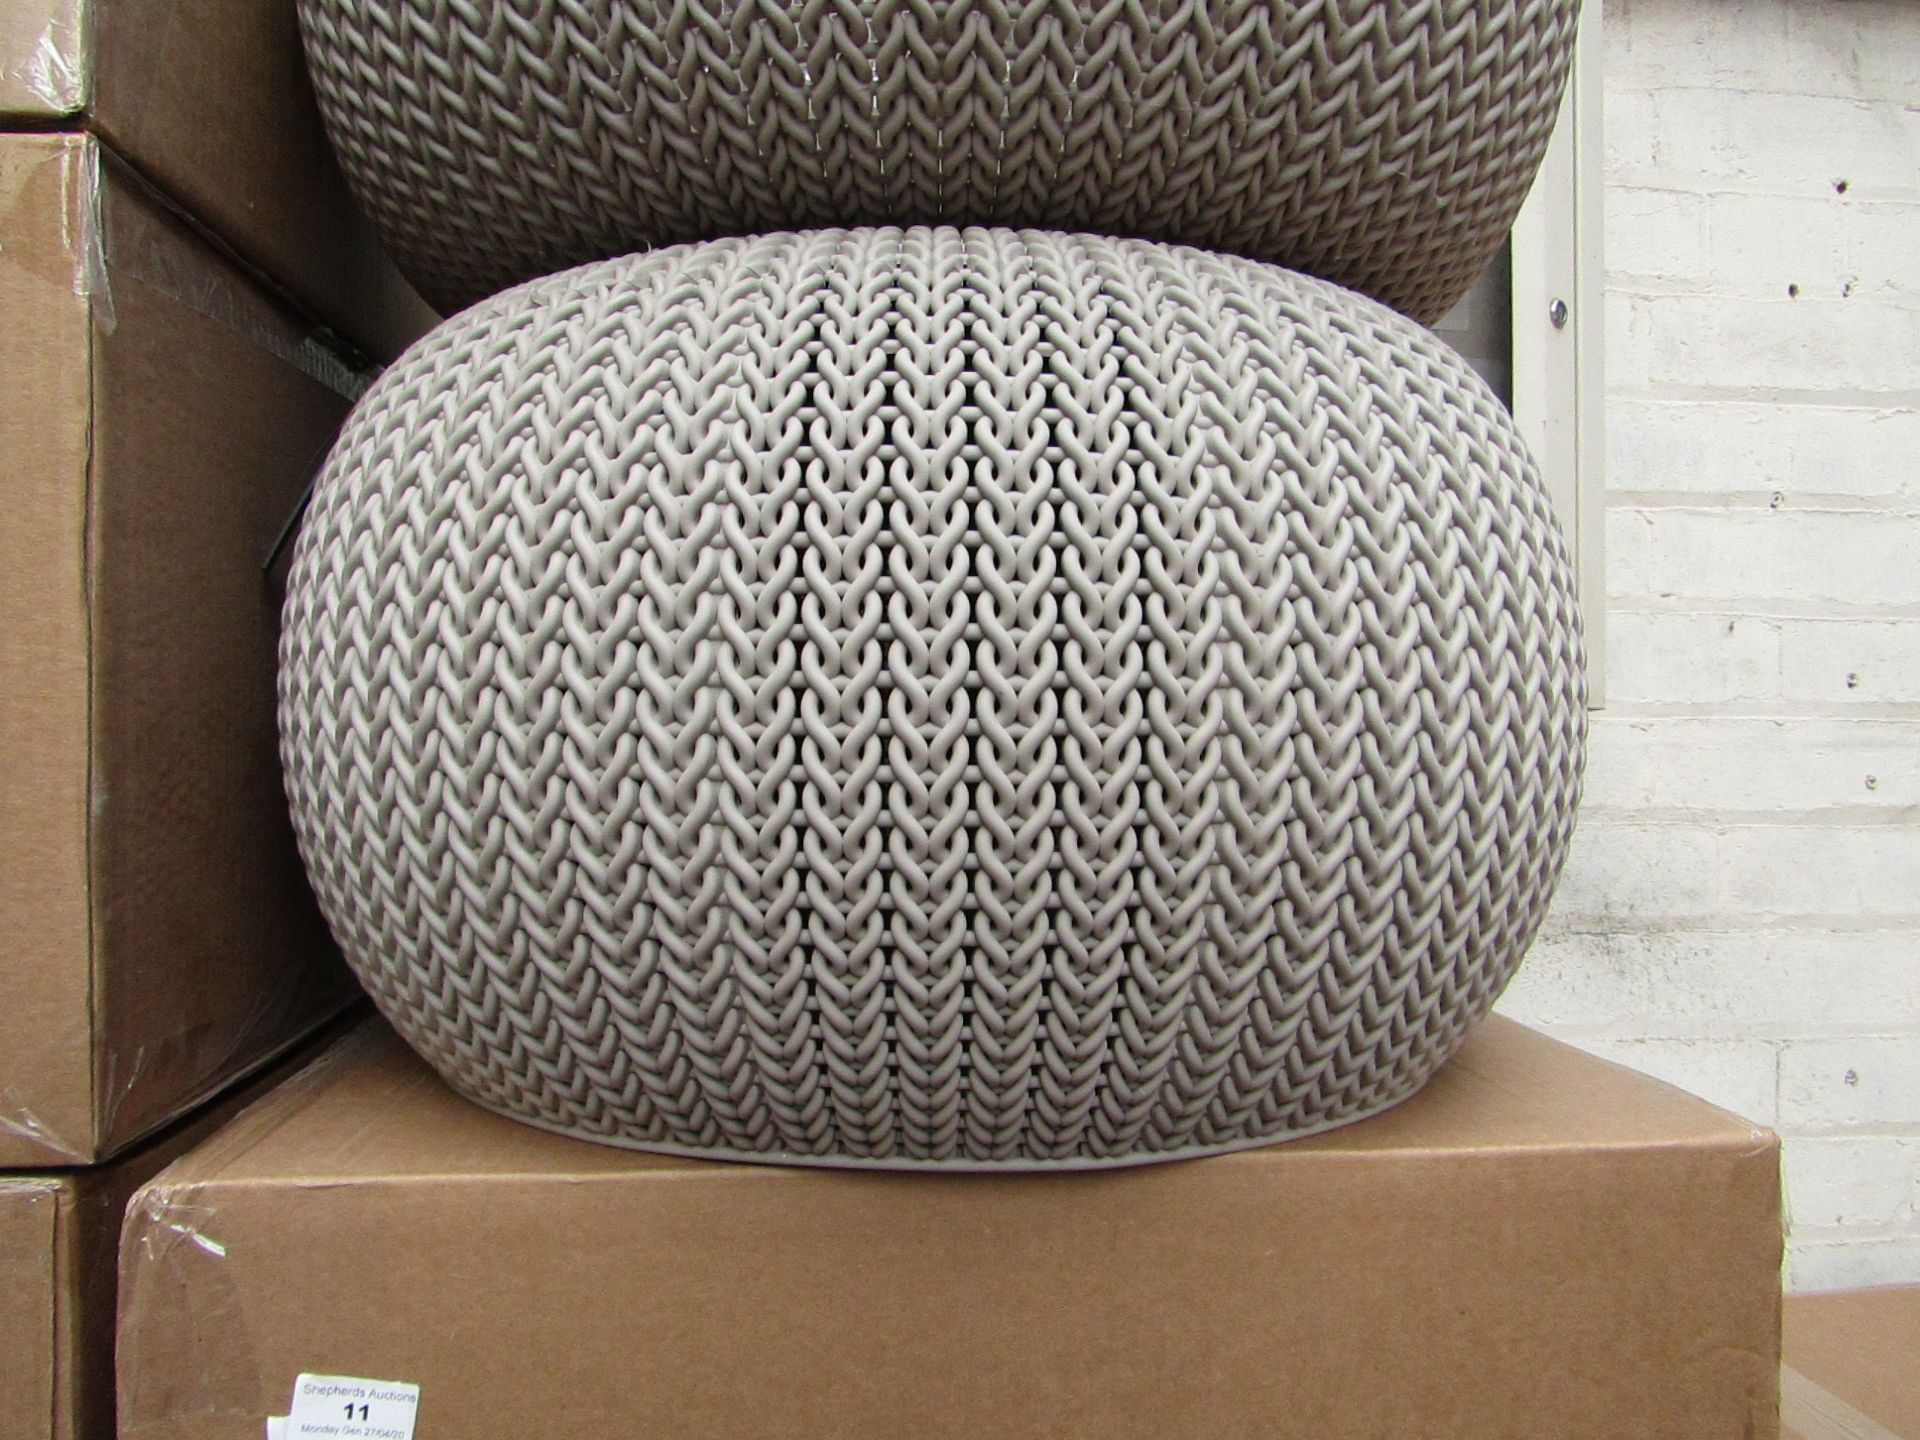 Keter Knit Collection - Cozy Seat - New with Tags & Boxed.